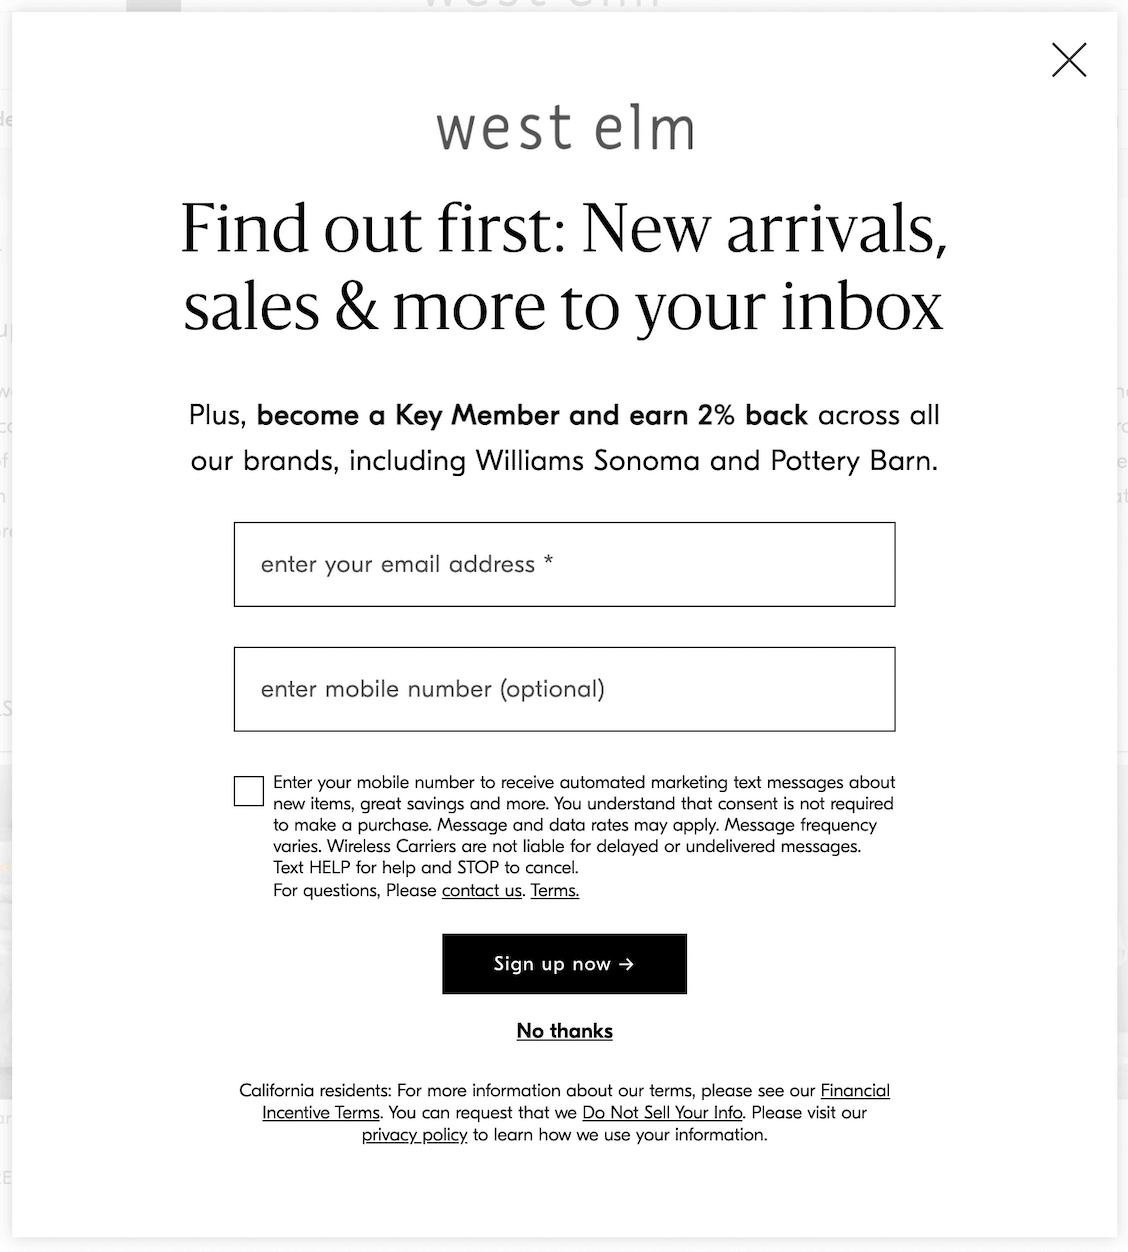 Text example from West Elm